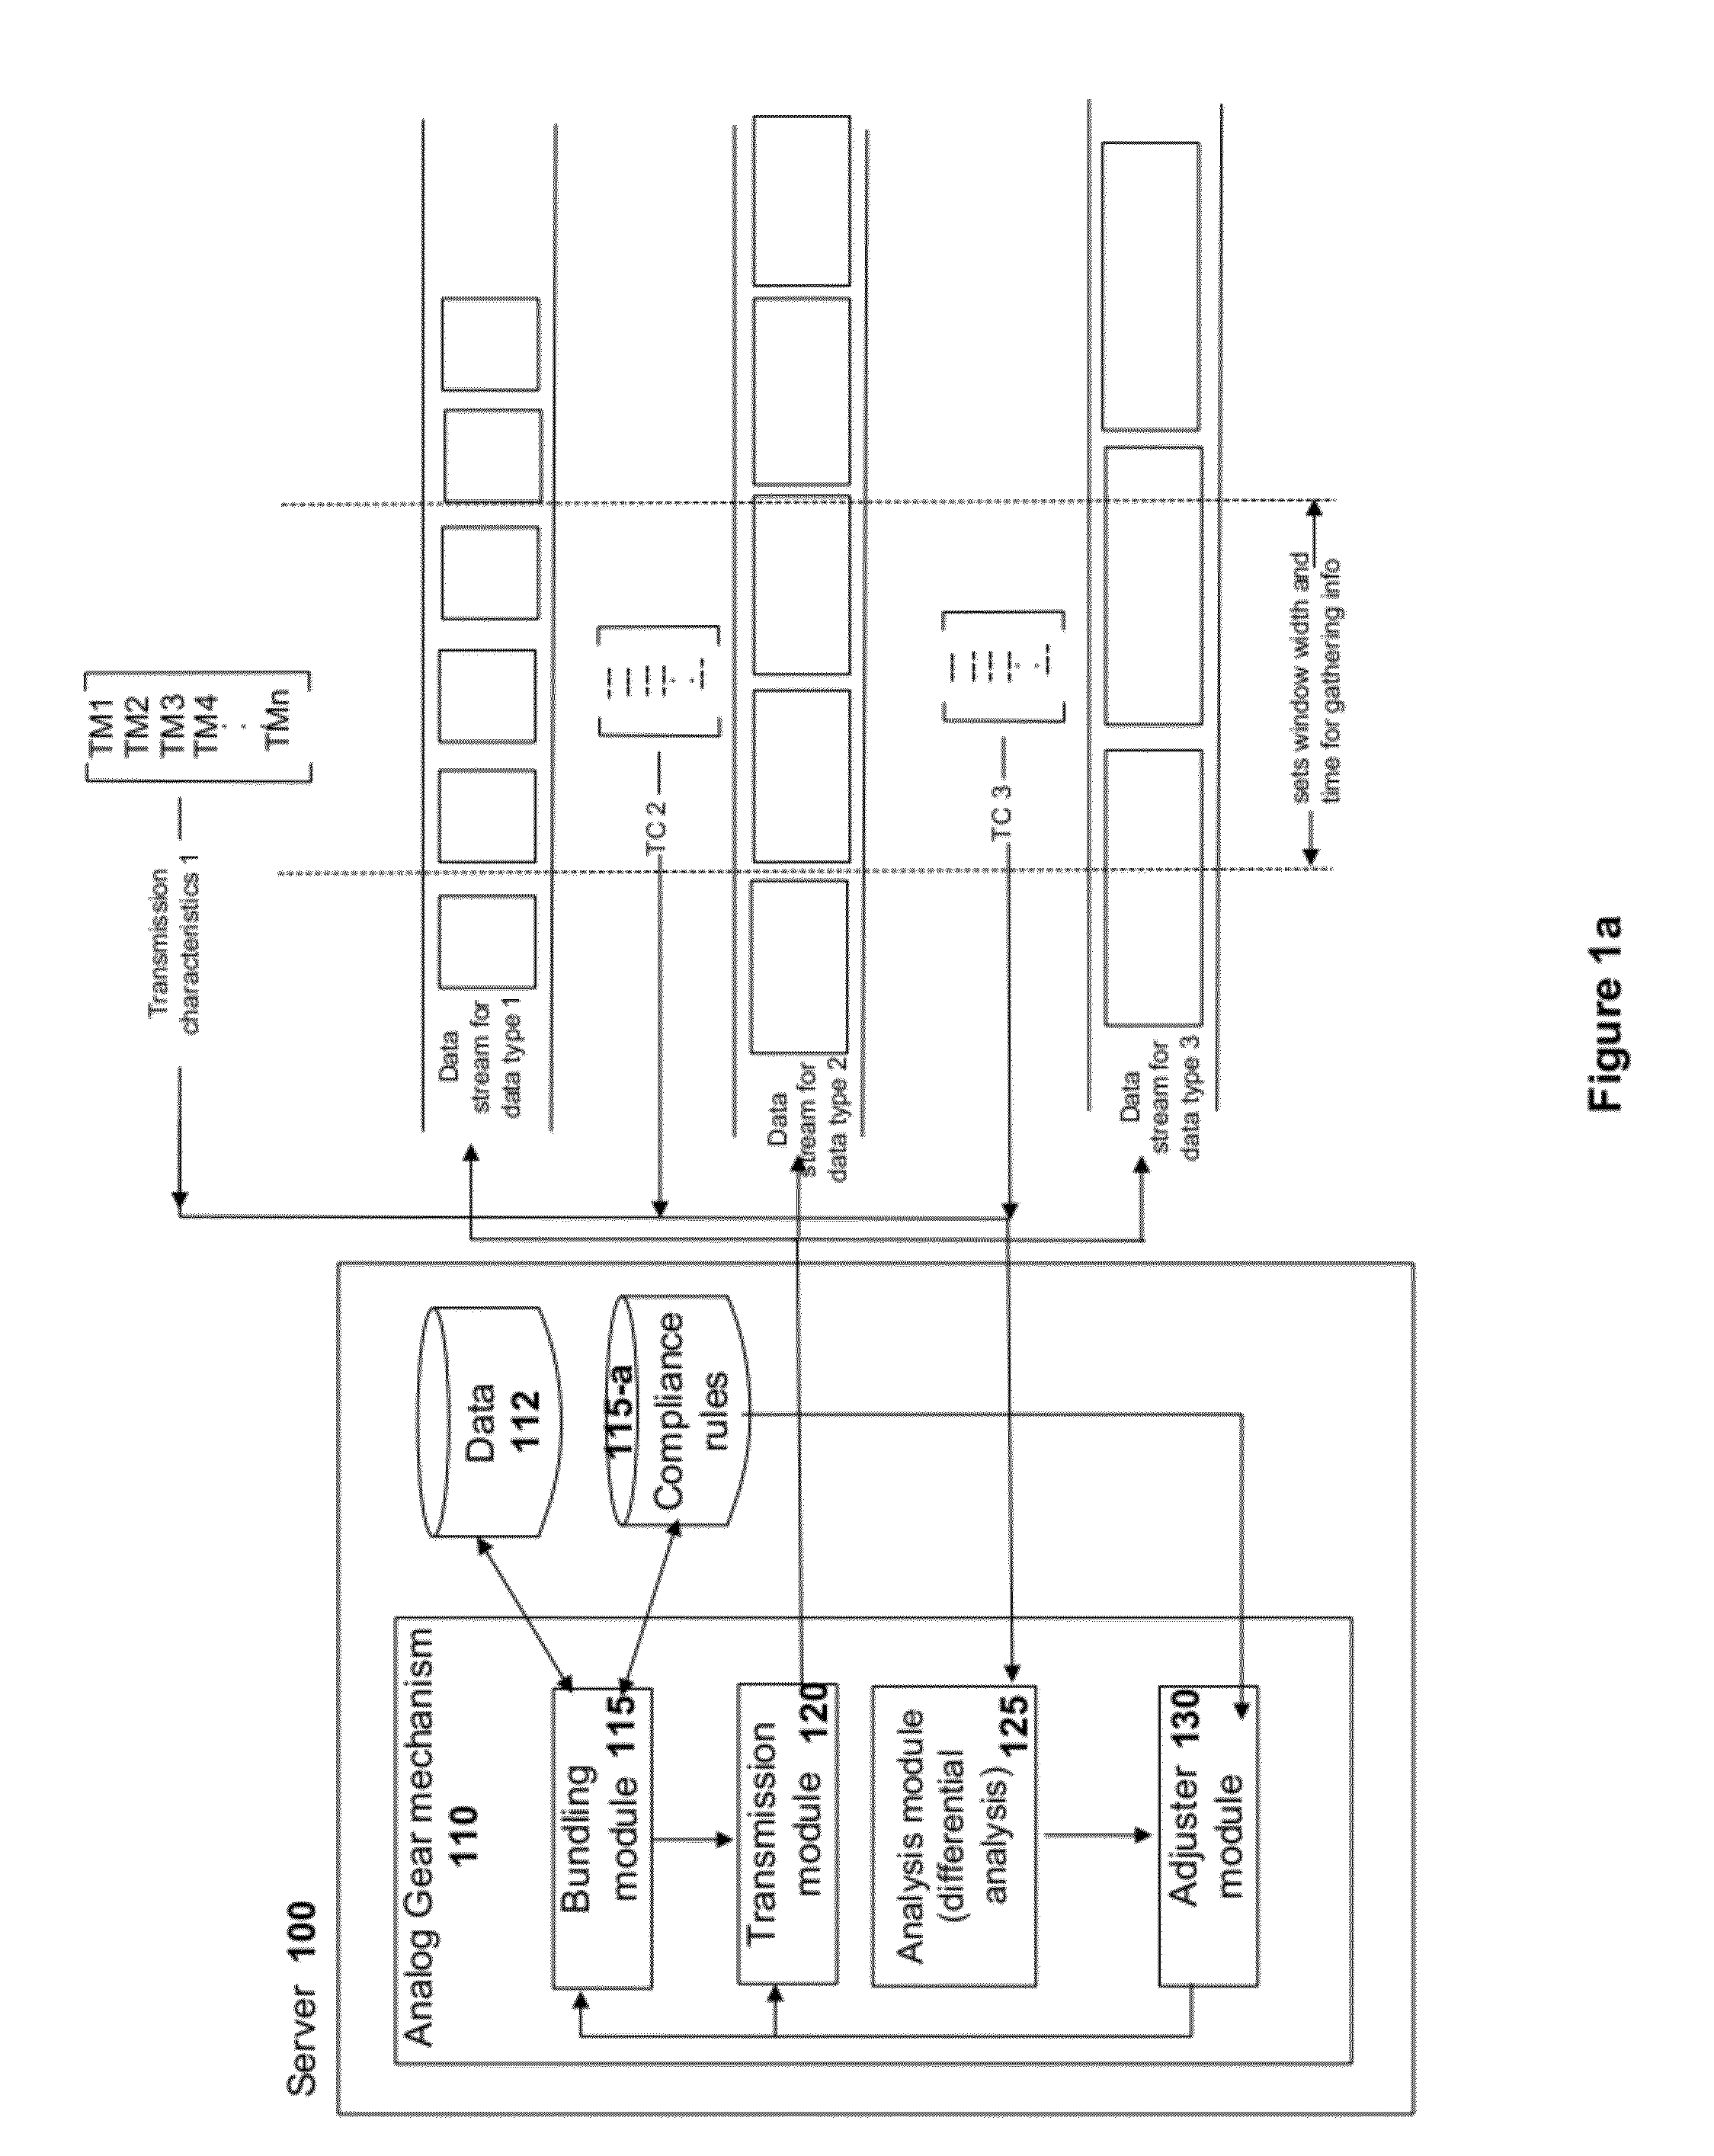 Methods and Apparatus for Using a Layered Gear to Analyze and Manage Real-time Network Quality of Service Transmission for Mobile Devices on Public Networks